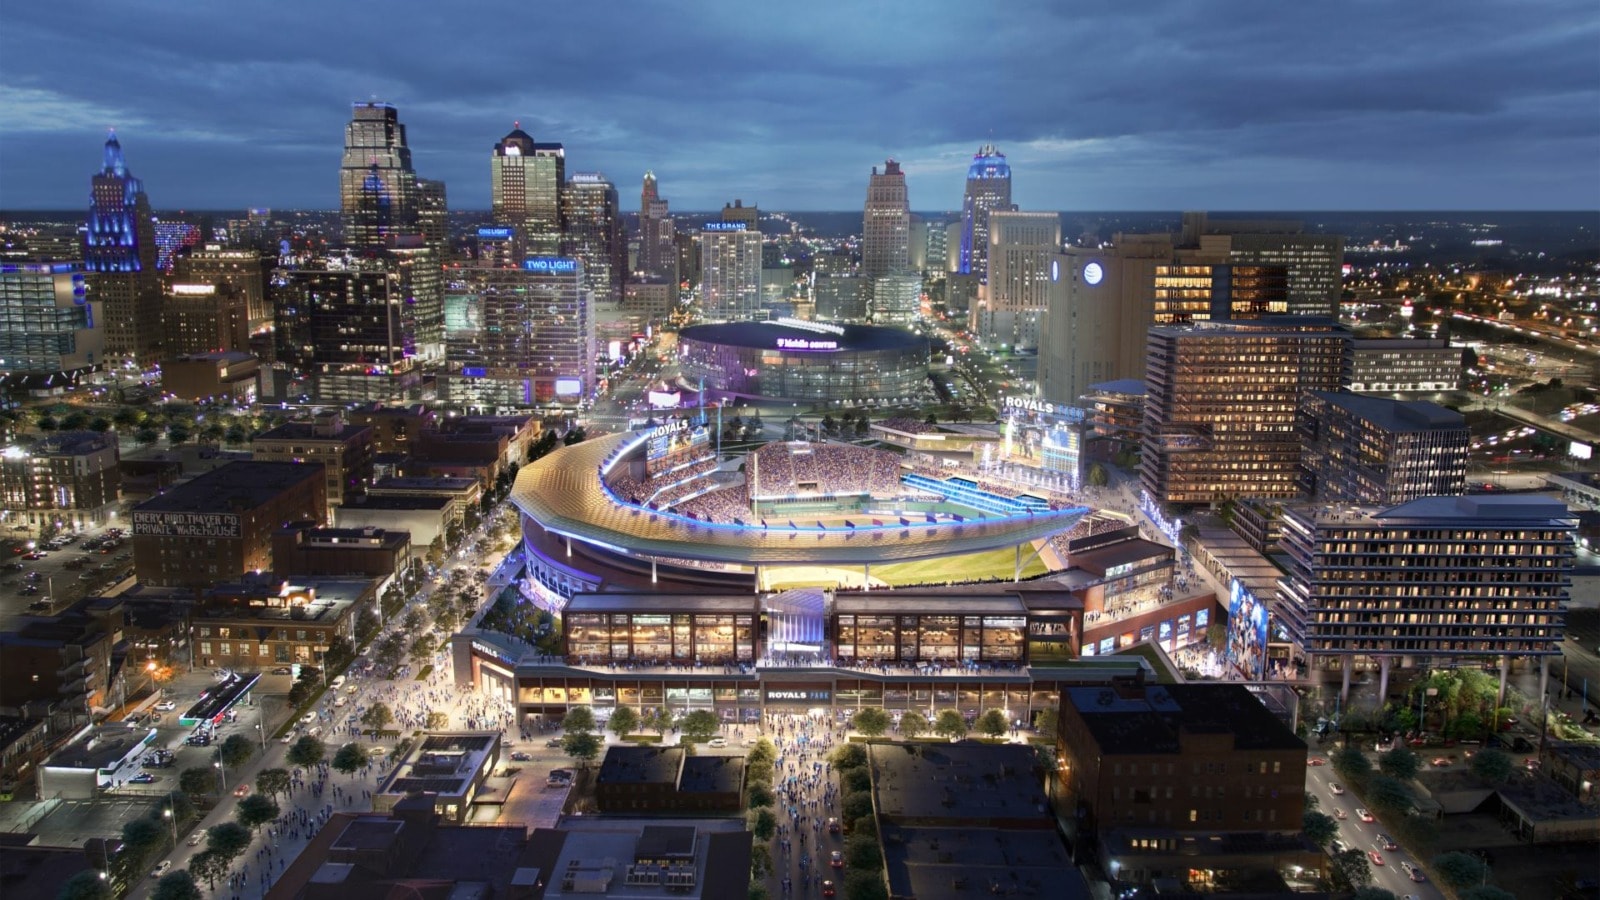 A view looking north from the proposed Kansas City Royals ballpark with the downtown skyline in the background.